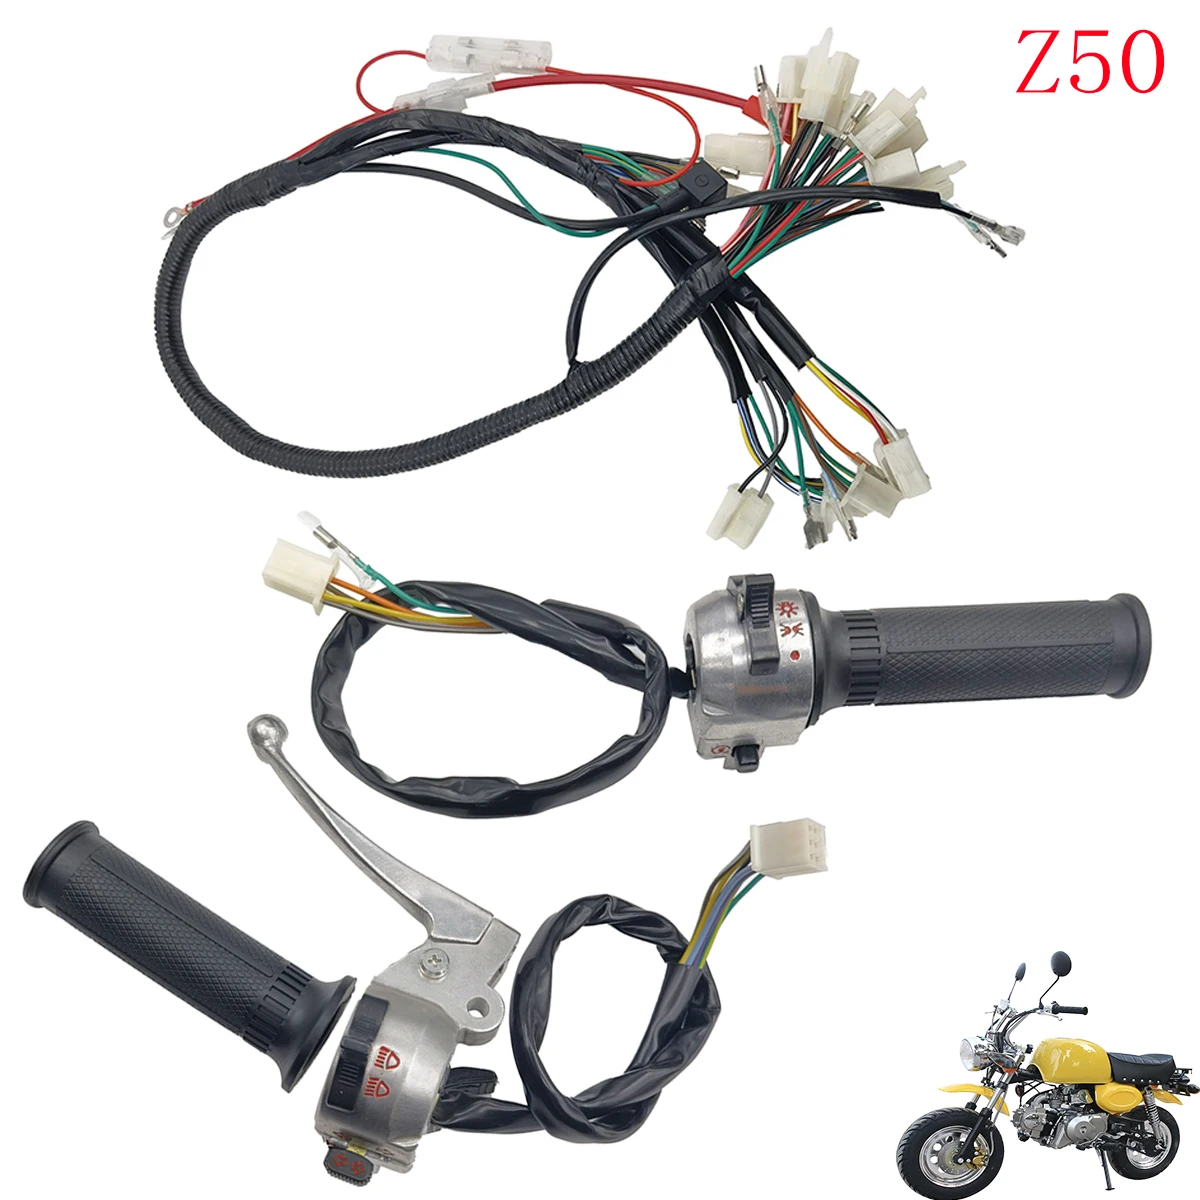 Complete Wiring Harness Assembly Control Switch and Turn Handle Grip For... - $33.99+